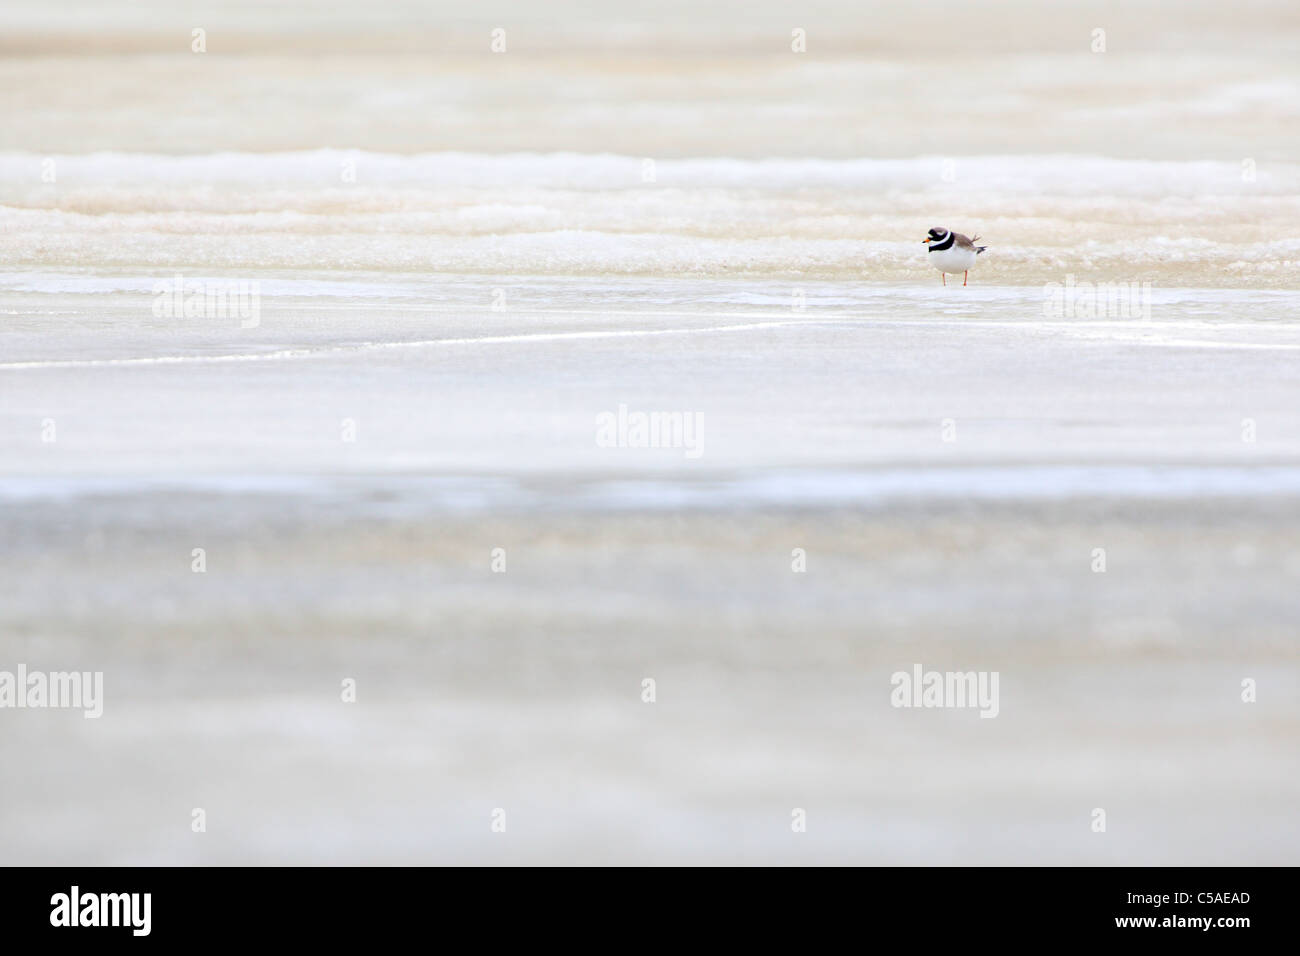 Ringed Plover (Charadrius hiaticula) standing on sea ice. April 2011, Europe. Stock Photo